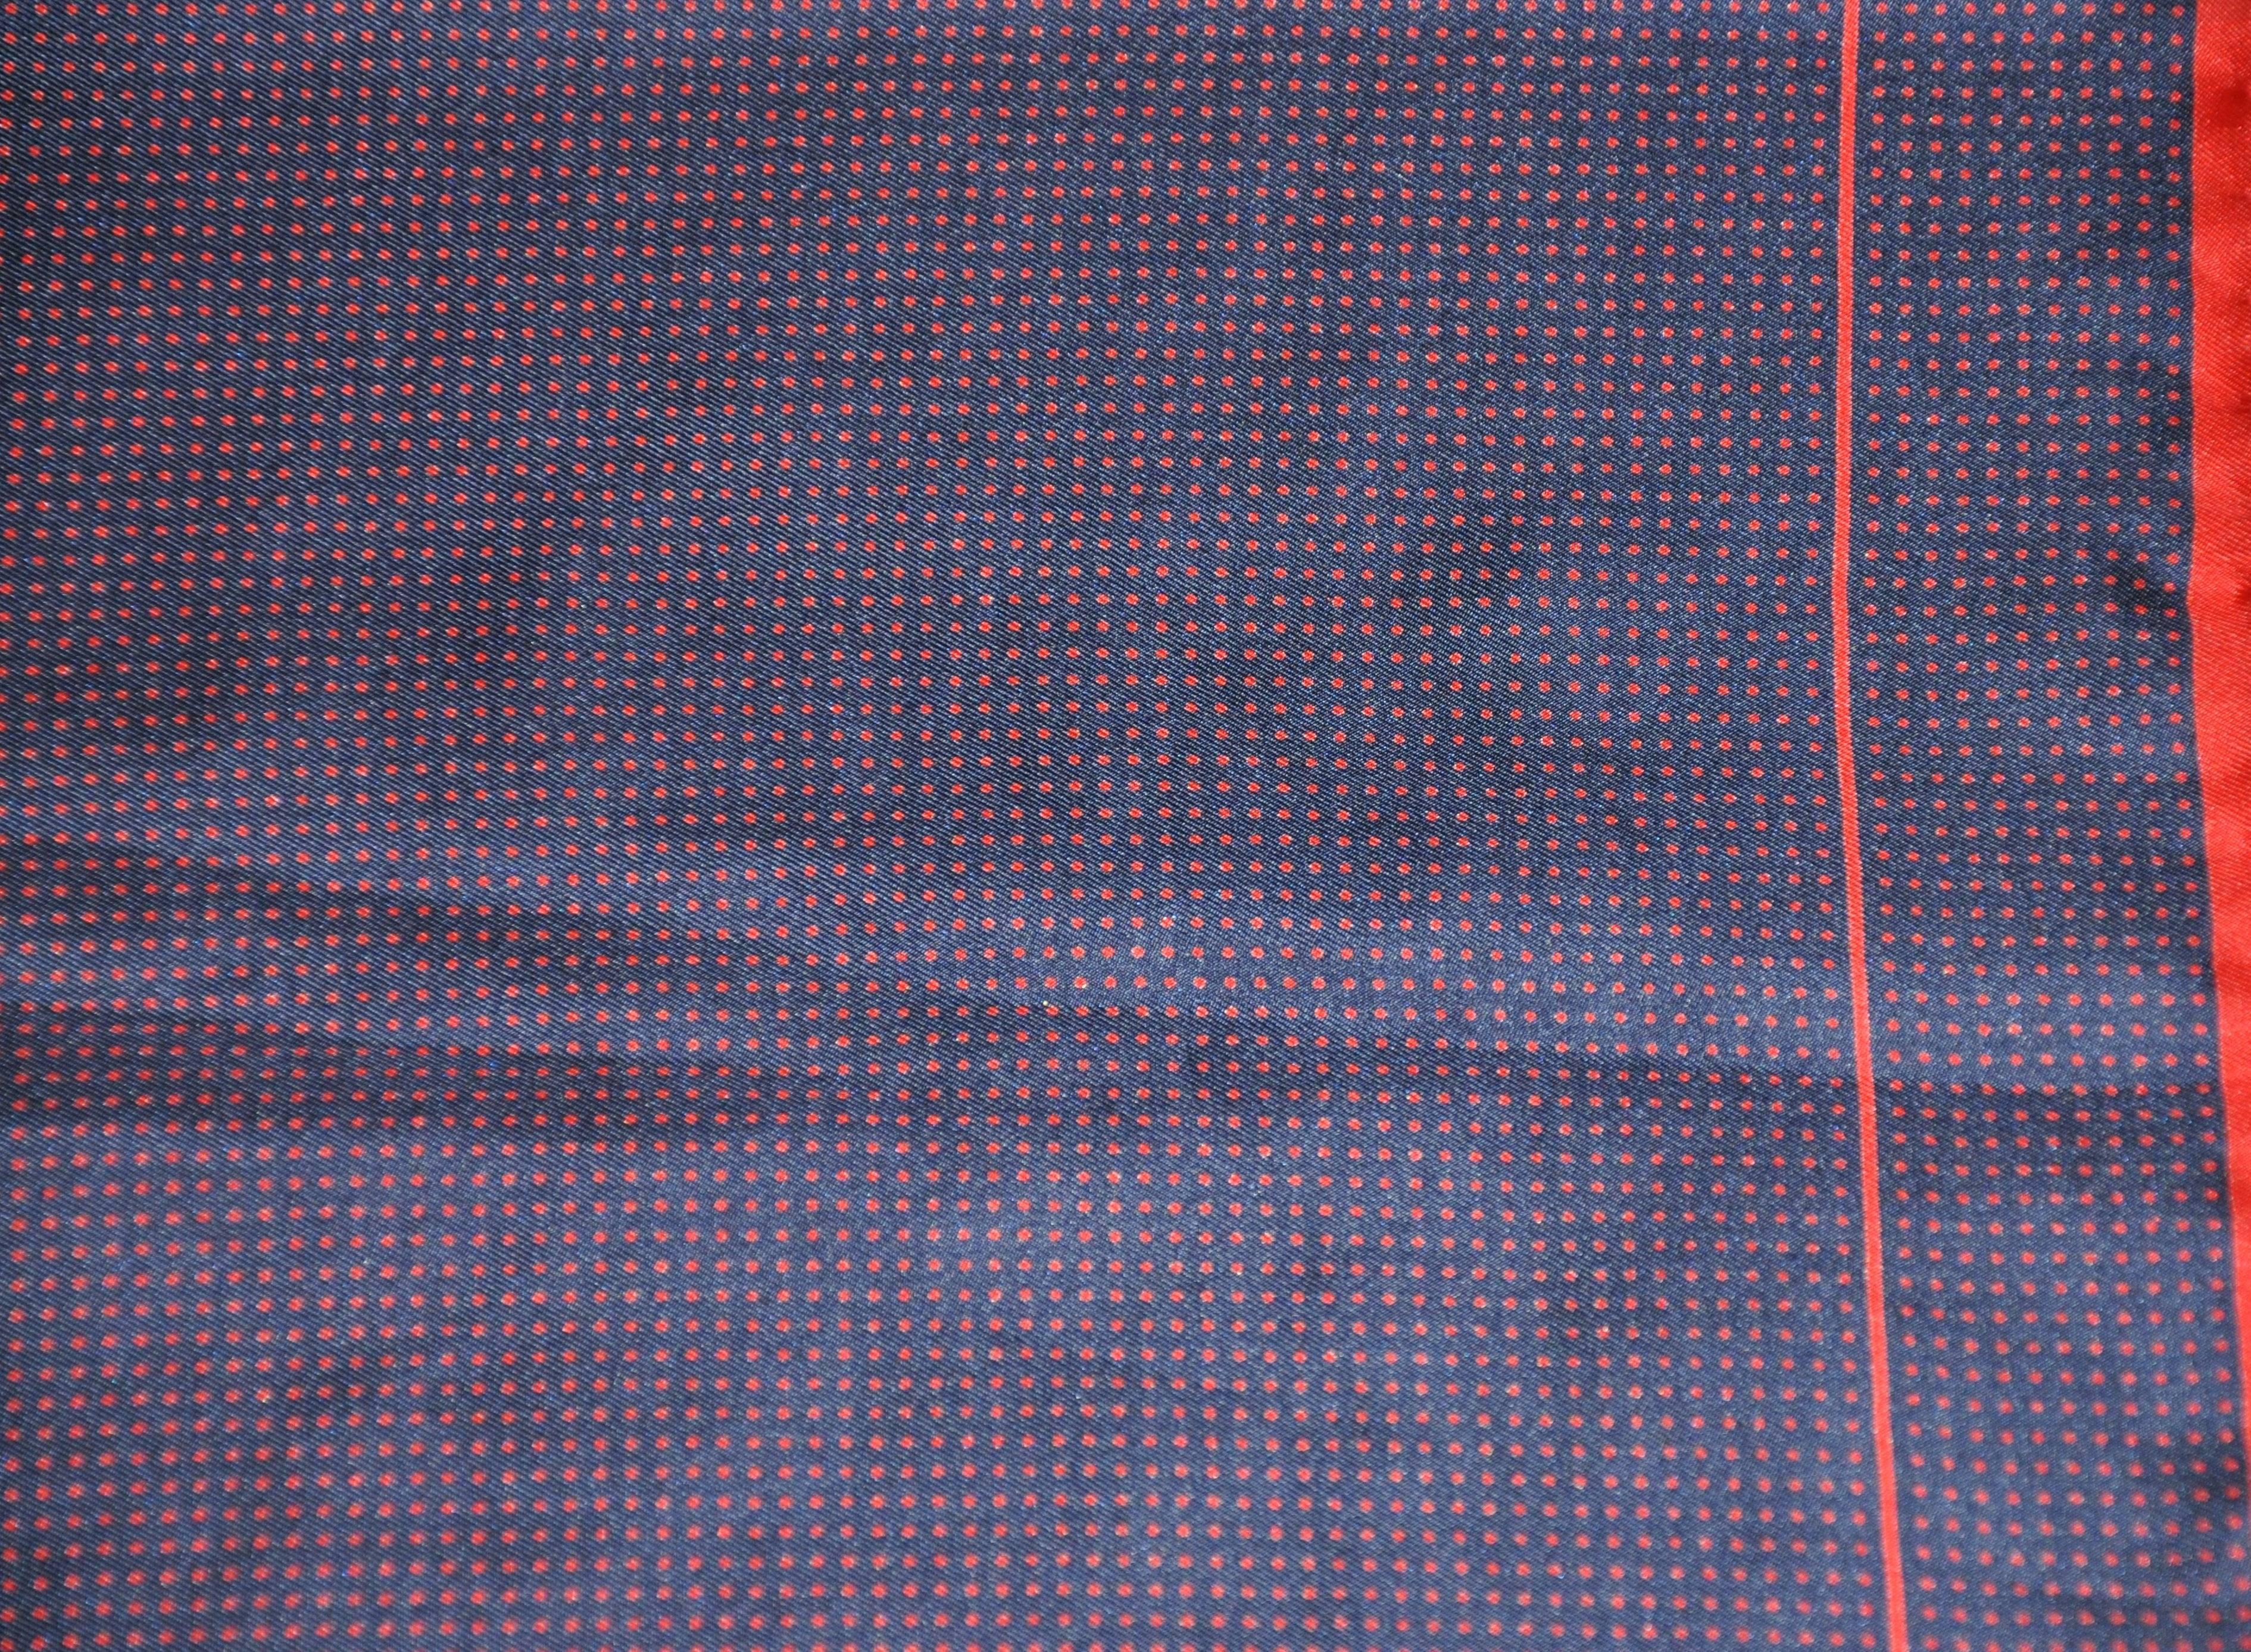        Pierre Cardin navy polka dot silk handkerchief is accented with hand-rolled red edges. This handkerchief measures 18